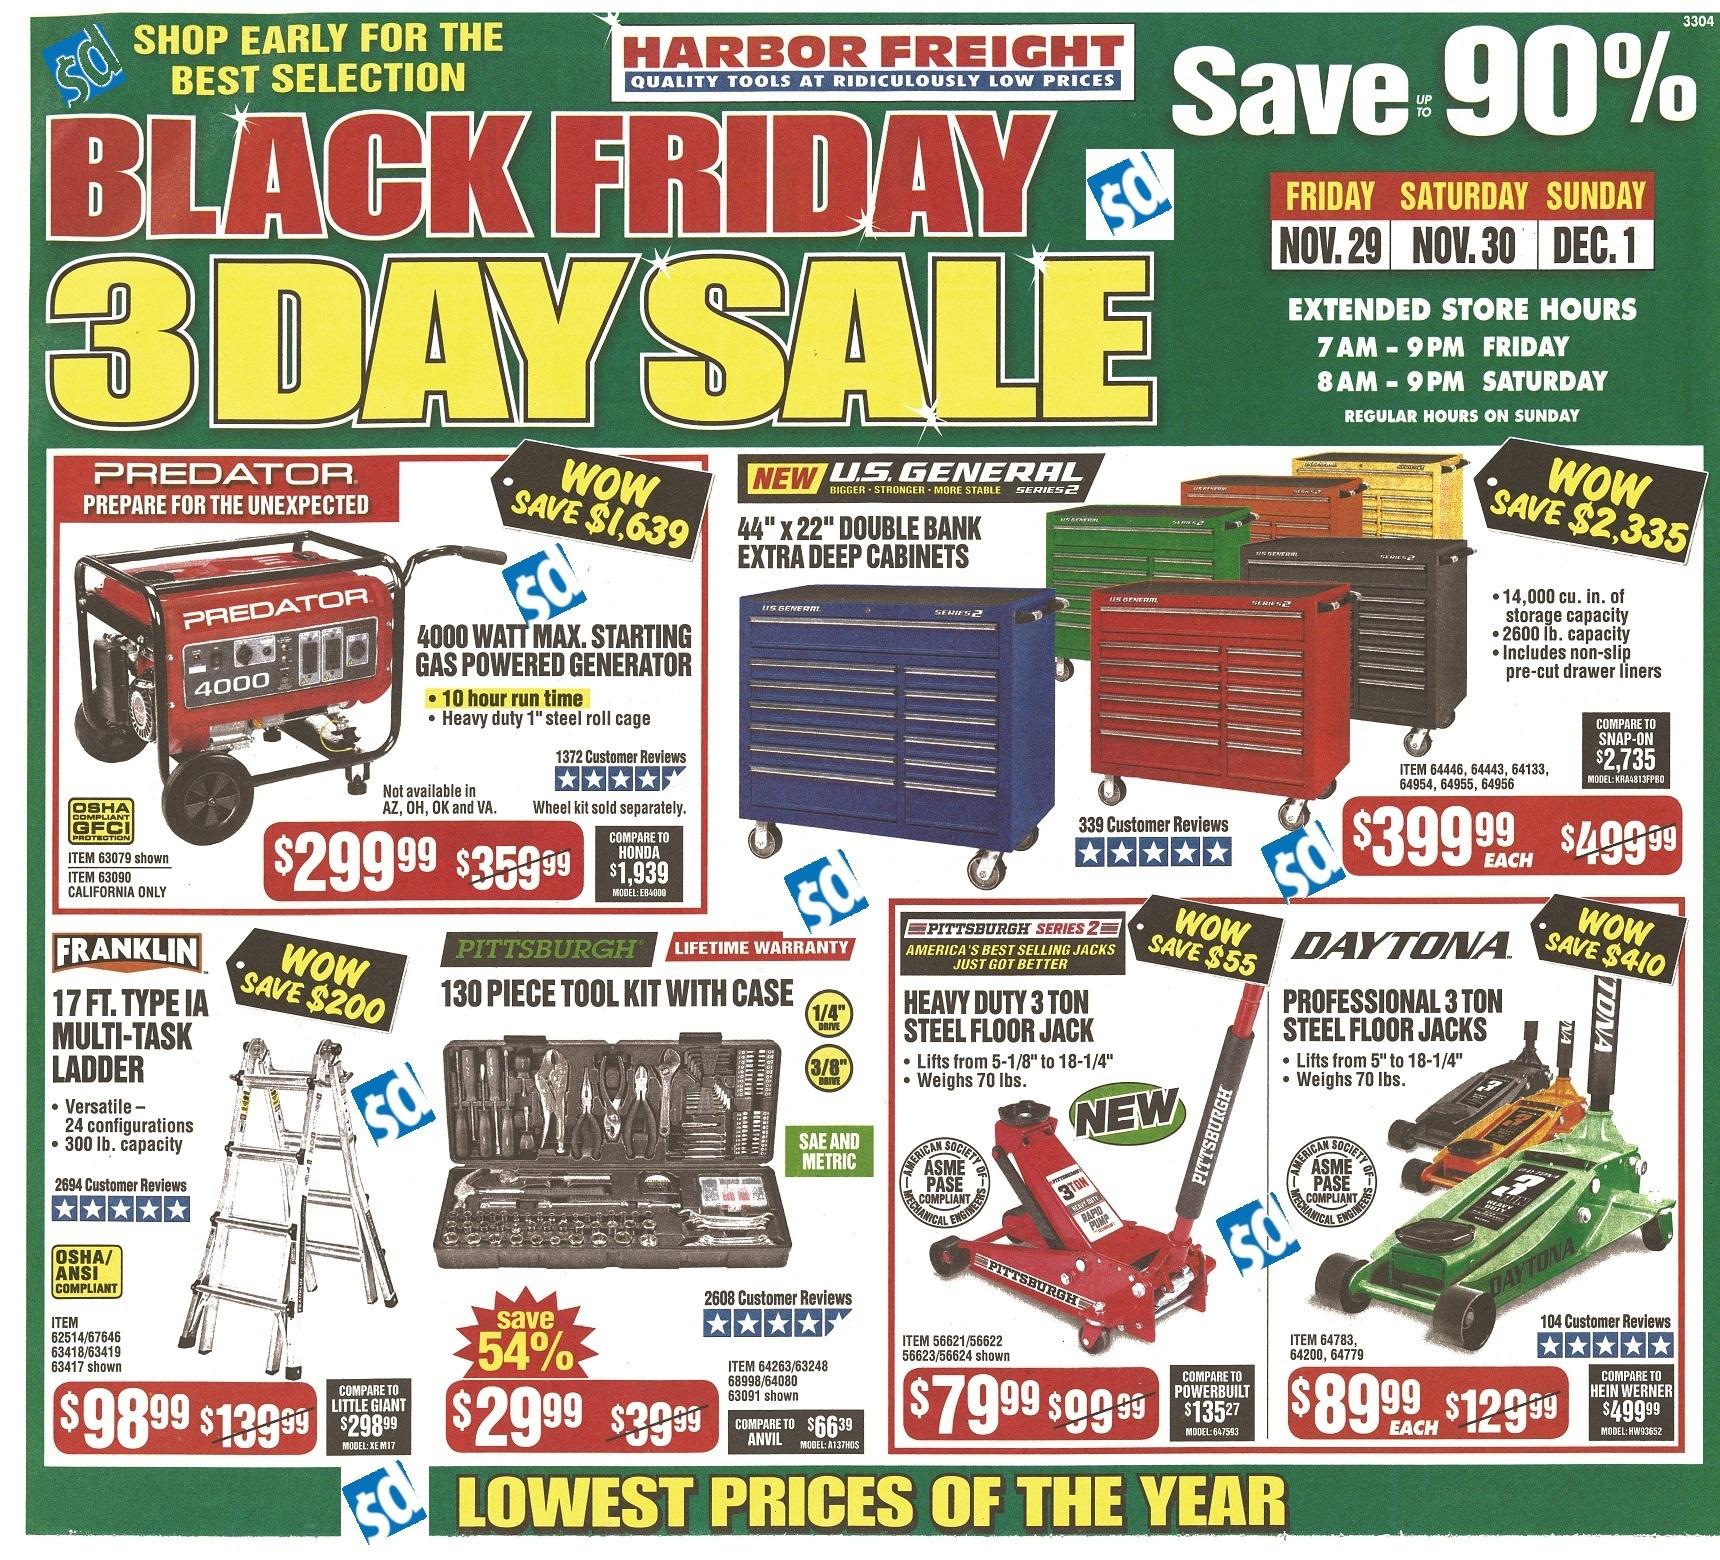 Harbor Freight Tools Black Friday Ad 2019 - Sale Live Now